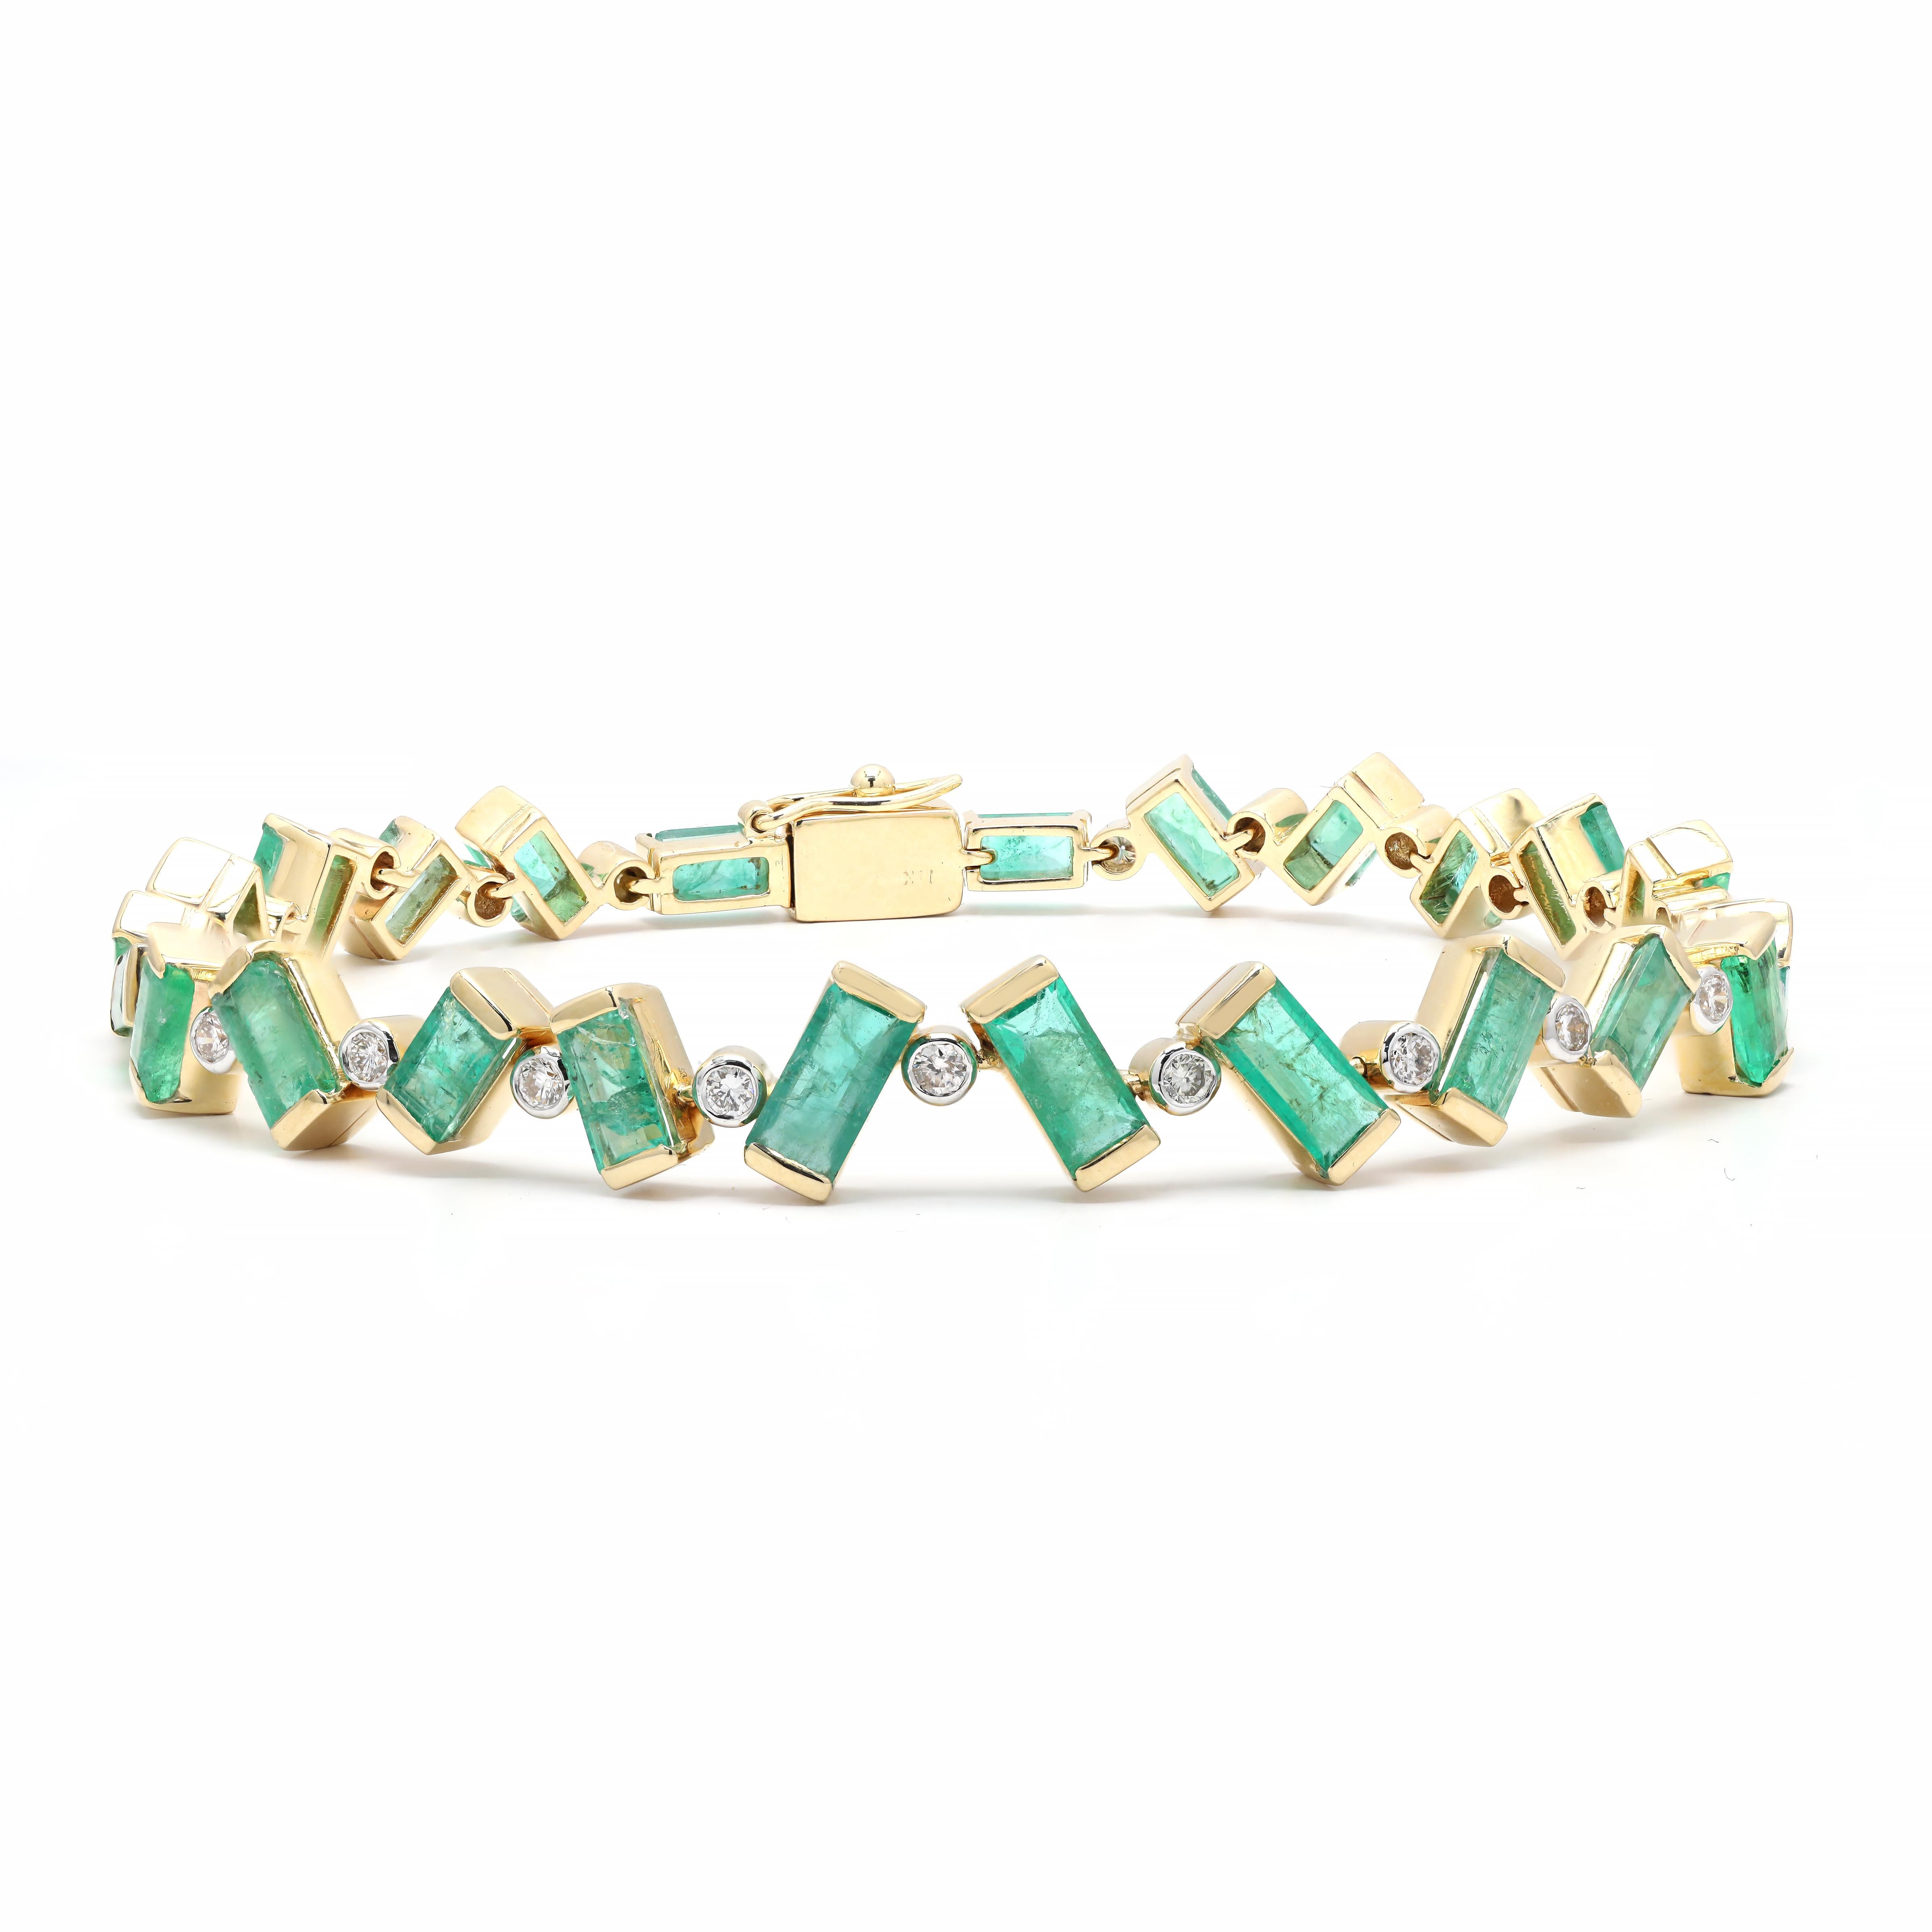 Baguette Cut 7.9 Ct Inclined Emerald Diamond Tennis Bracelet in 14K Yellow Gold For Sale